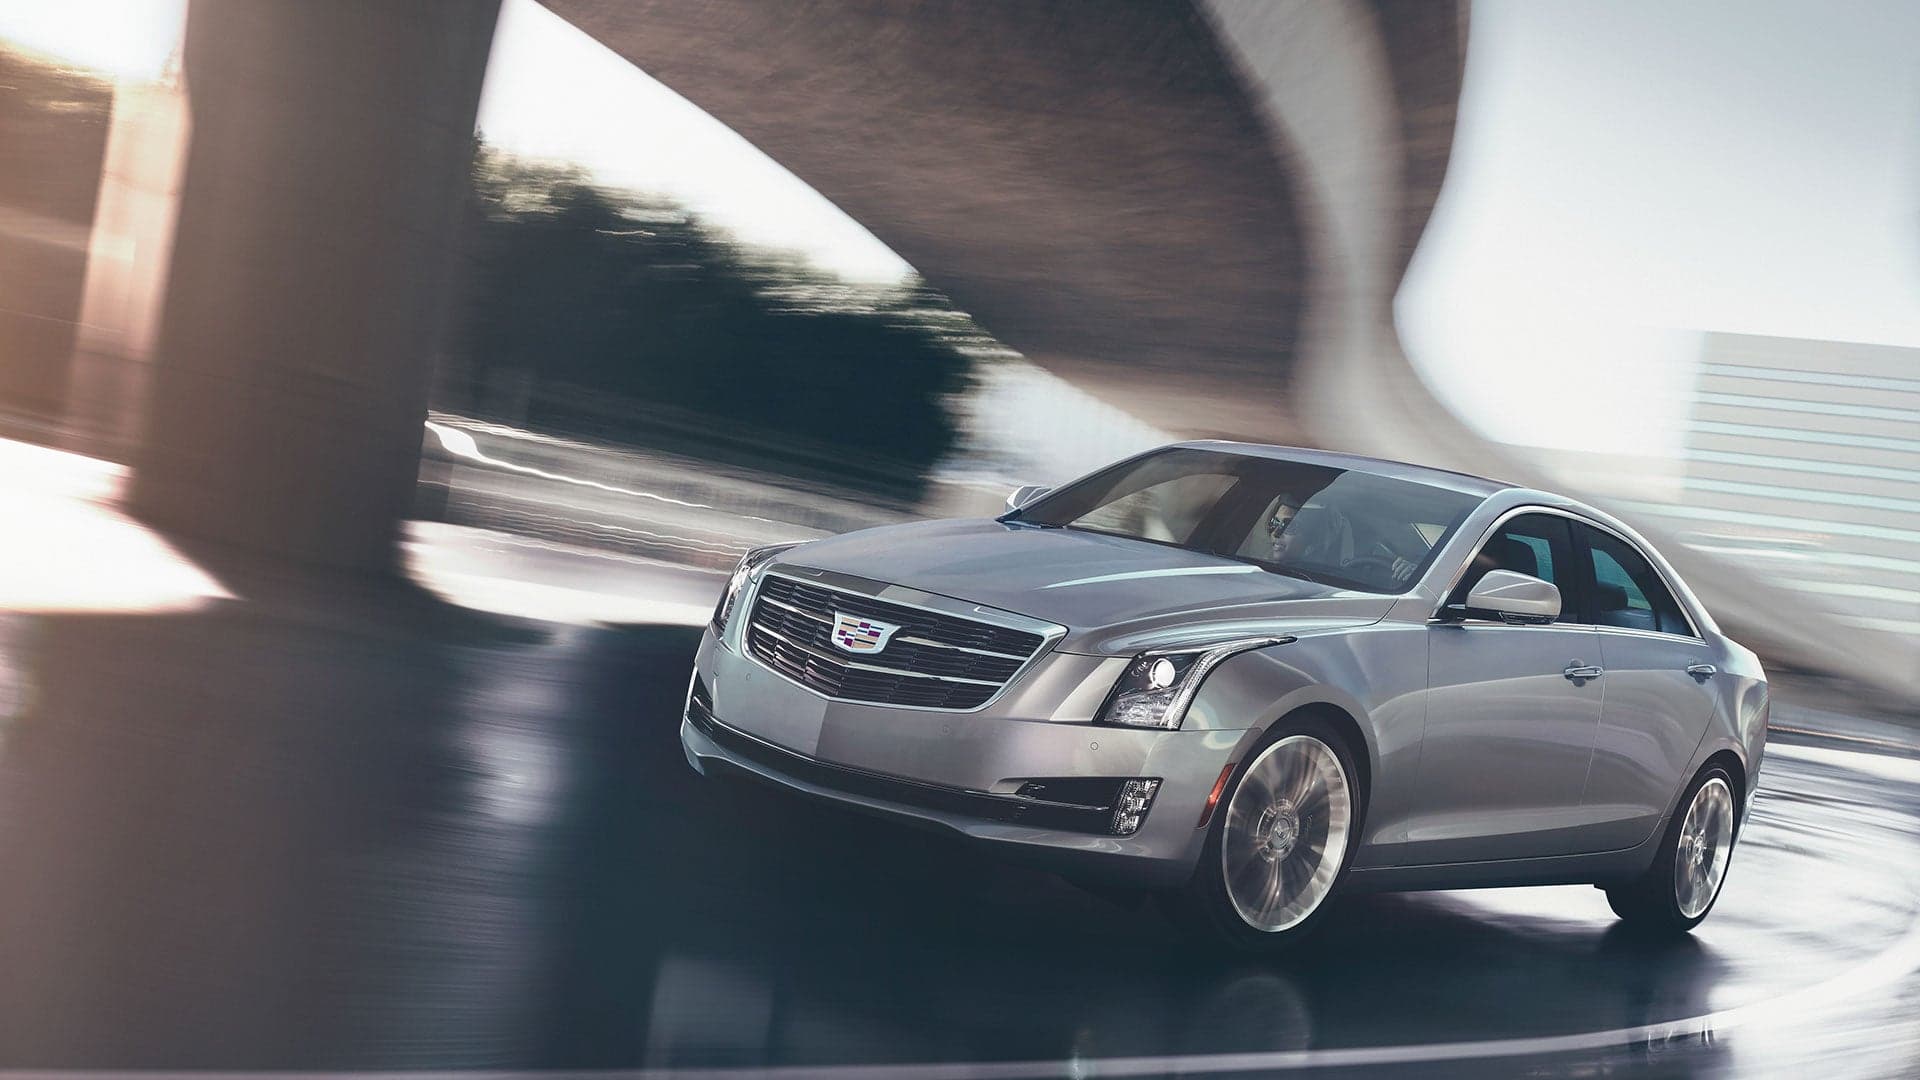 The Cadillac ATS 2.0T Carbon Black Sport Proves America Can Be Great at Compact Sedans